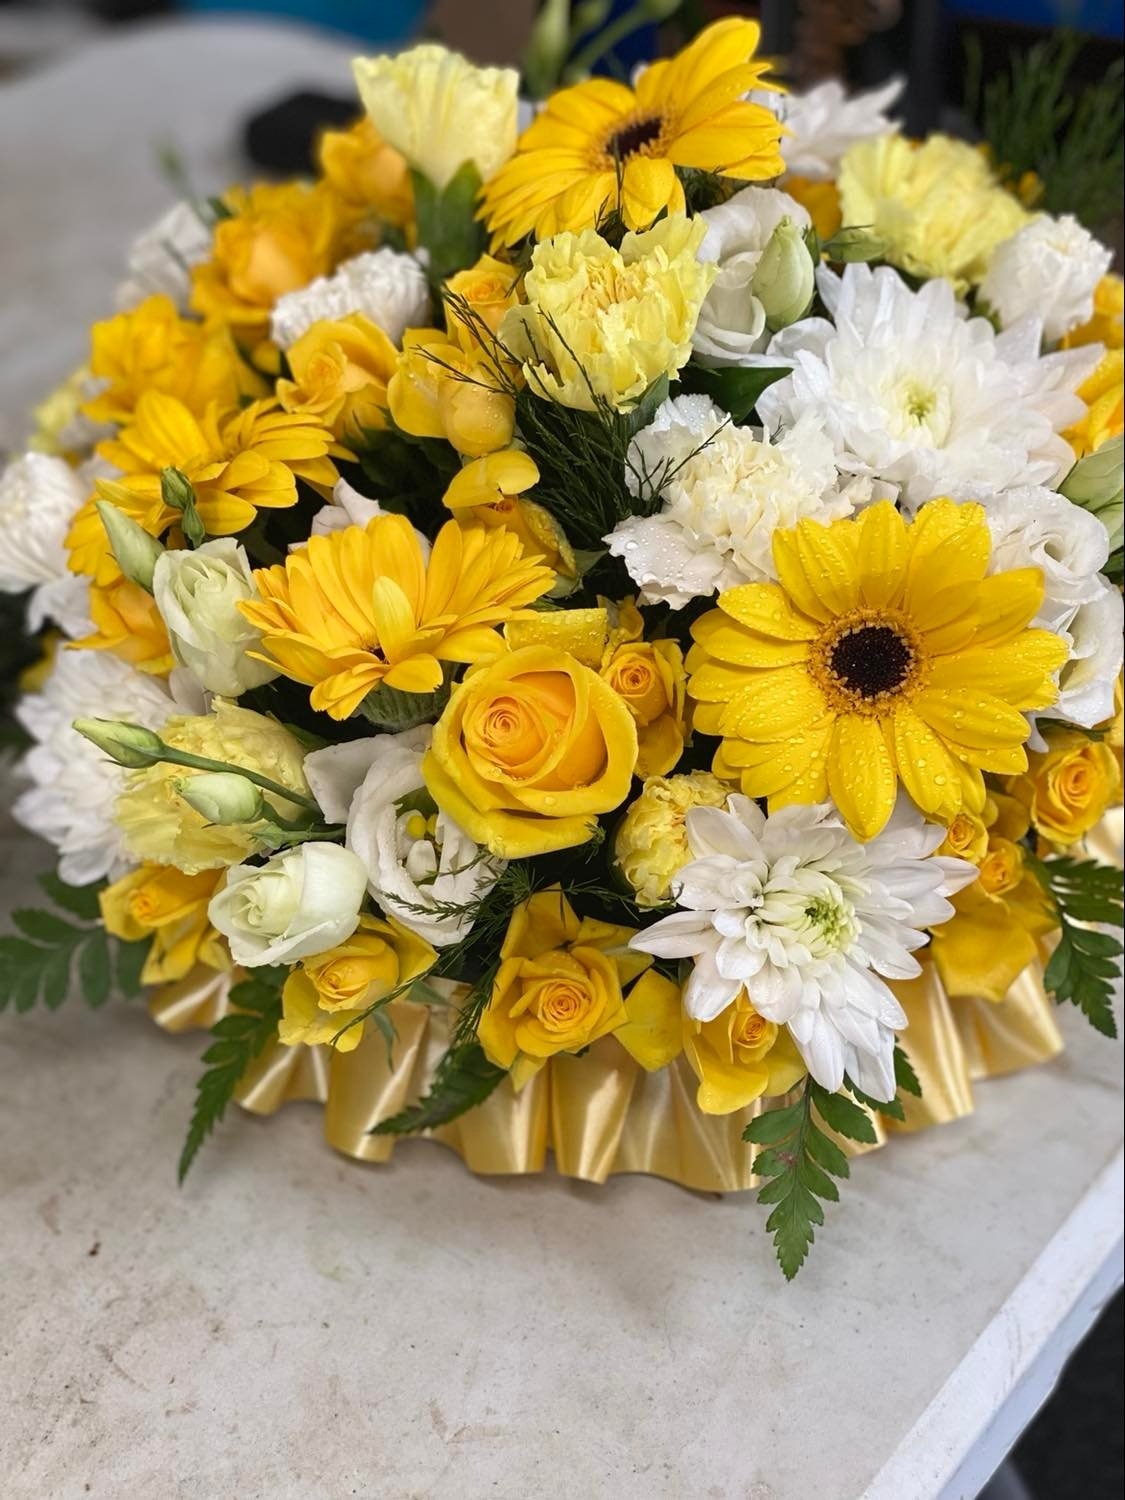 Yellow and White Posy Funeral Arrangement